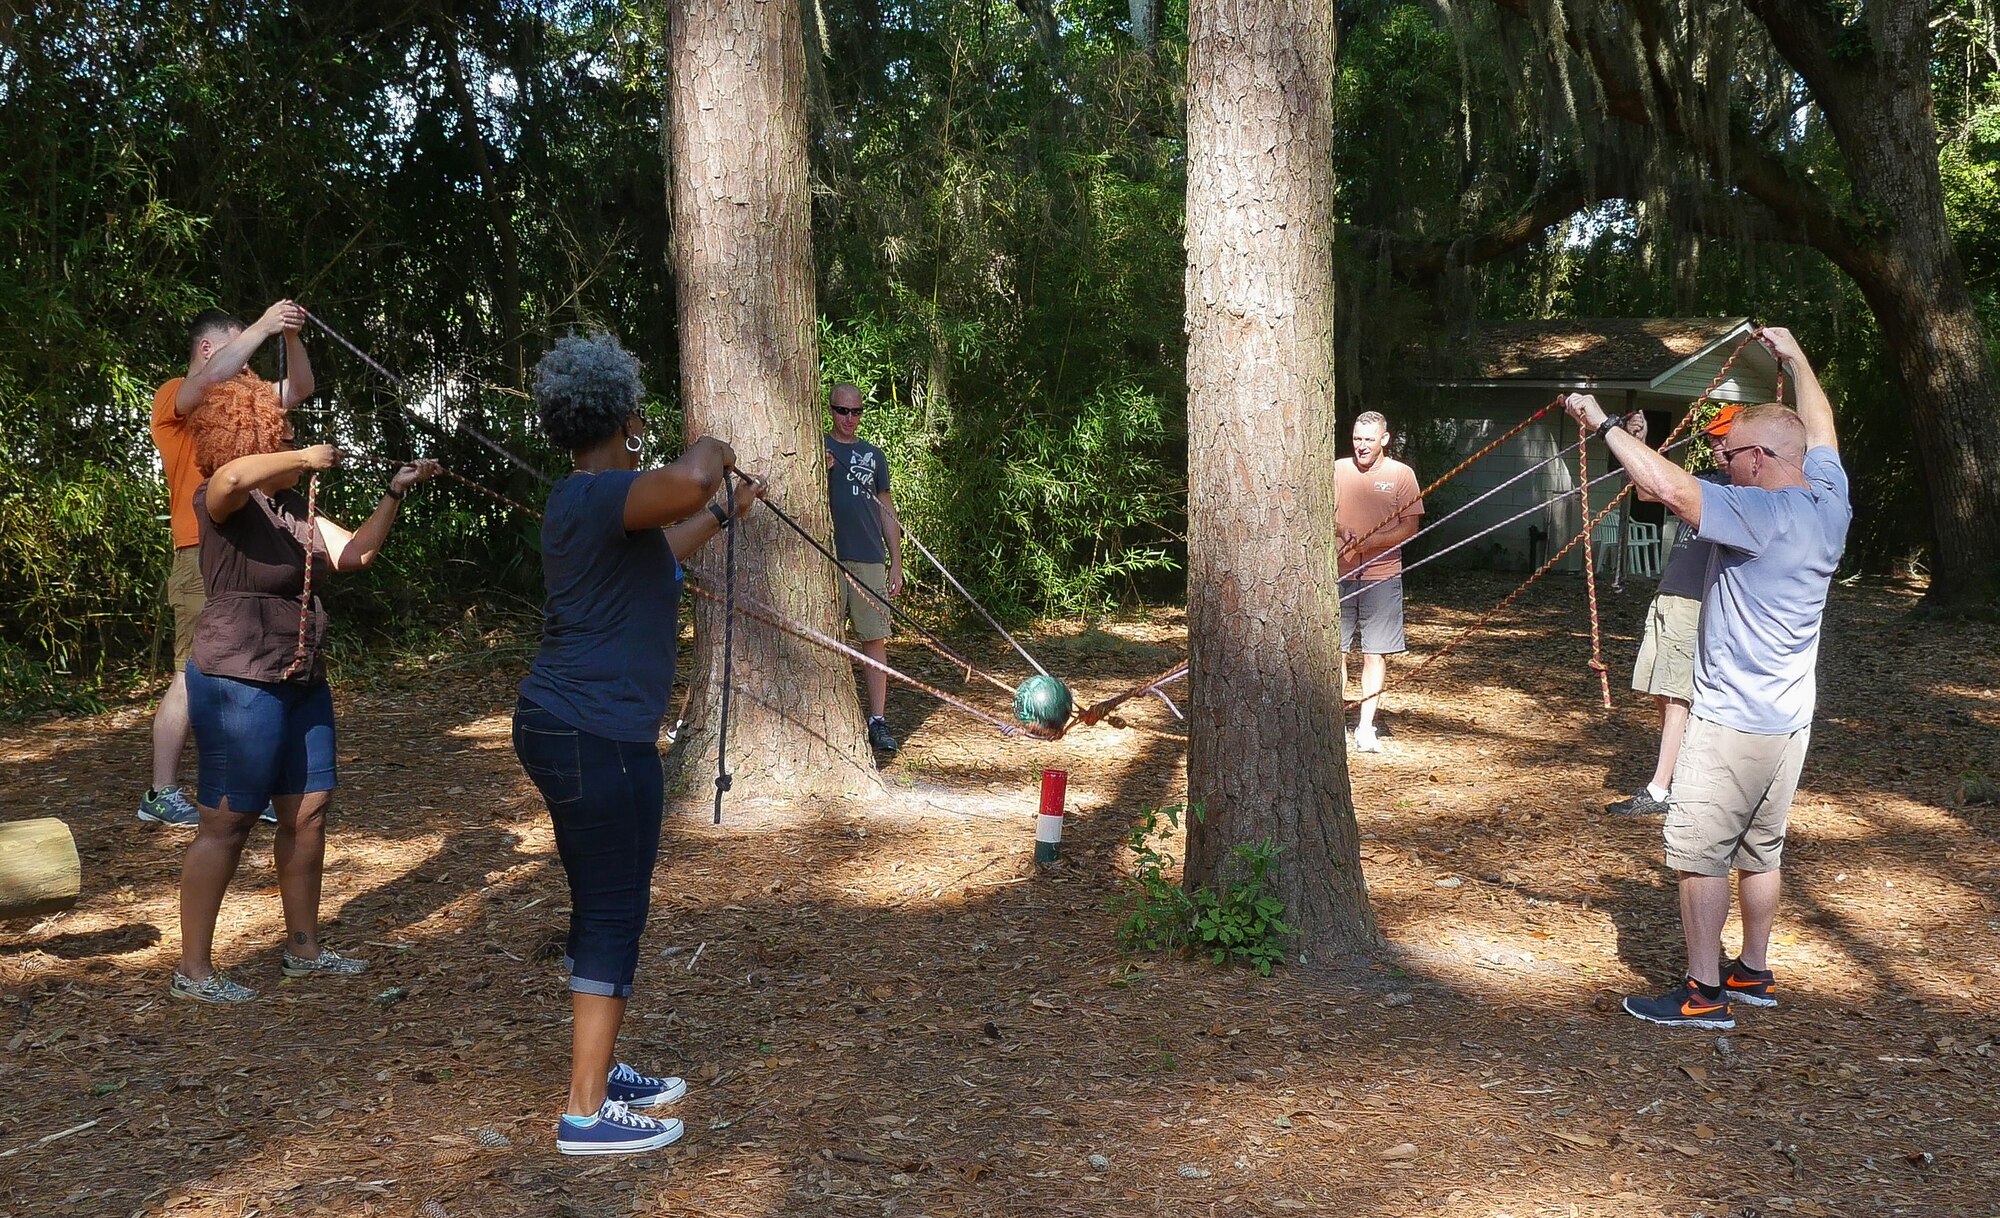 U.S. Airmen with the Georgia Air National Guard, work together during a team building exercise at the outdoor adventure course during the Strong Bonds singles retreat at the Sea Palms Resort, Saint Simons Island, Ga., June 27, 2015. The retreat, hosted by chaplains from the 116th Air Control wing, is a key component of the unit's resiliency program aimed at helping Airmen from Air National Guard units across Georgia to build relationships, learn to trust people, and hone their teambuilding skills. (U.S. Air National Guard photo by Senior Master Sgt. Roger Parsons/Released)